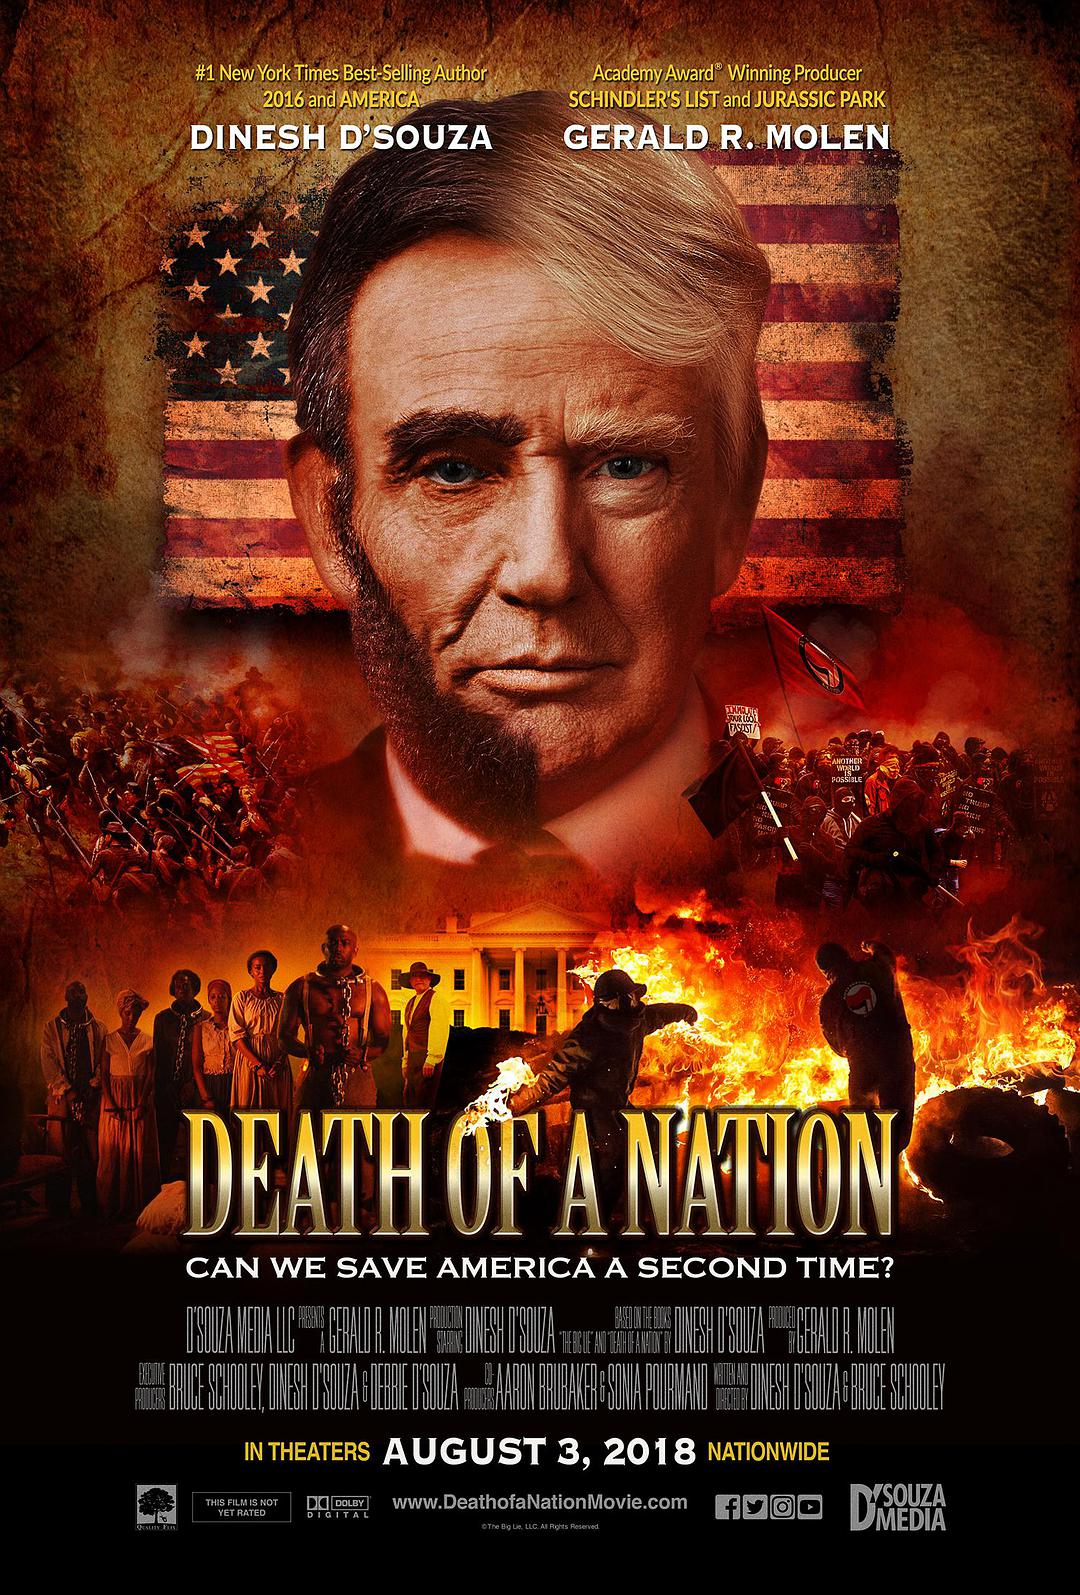 /һҵ Death.of.a.Nation.2018.1080p.BluRay.x264.DTS-FGT 9.82GB-1.png